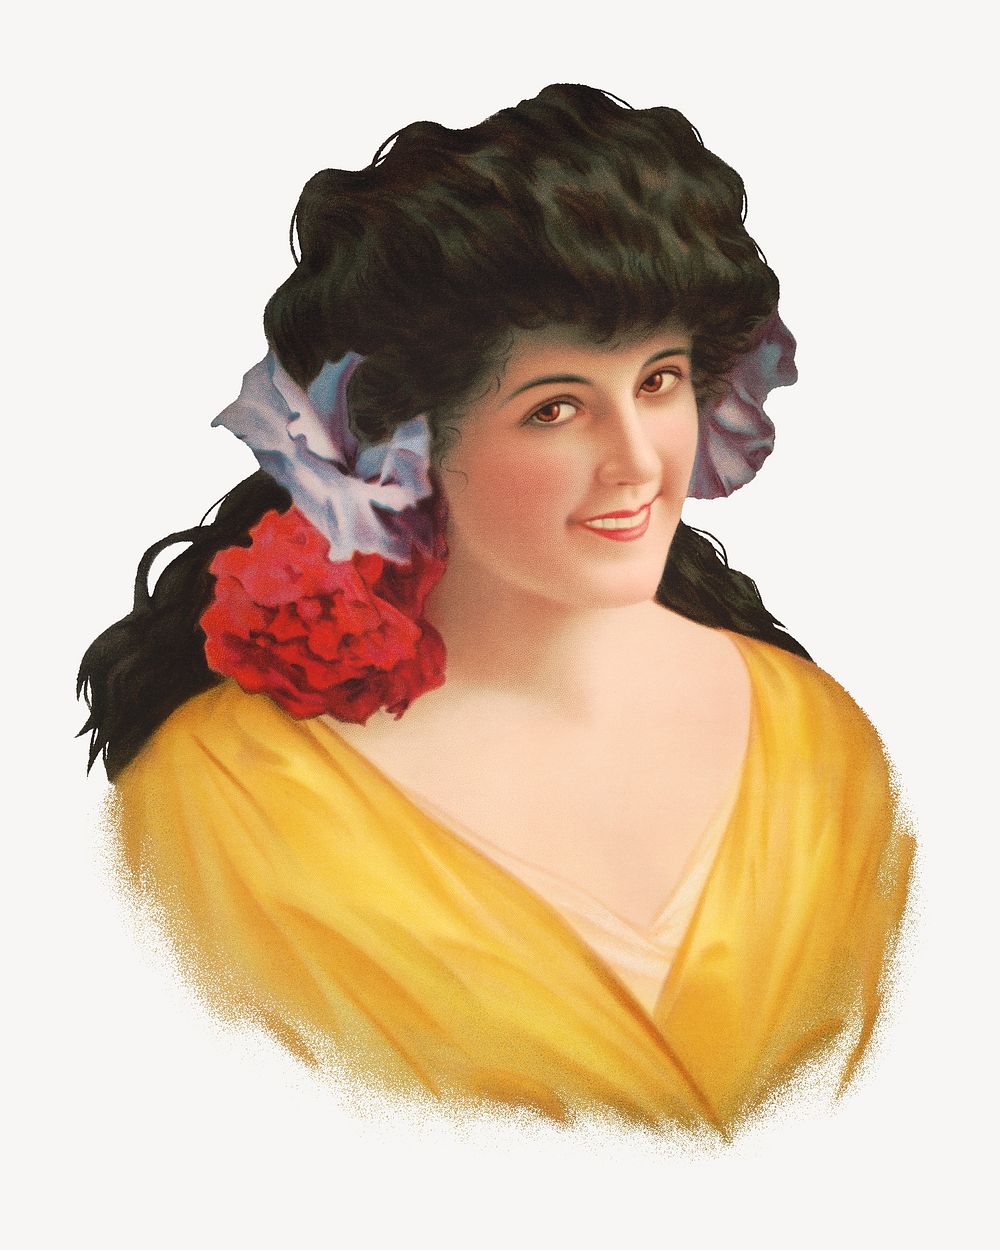 Victorian woman smiling portrait illustration.   Remastered by rawpixel